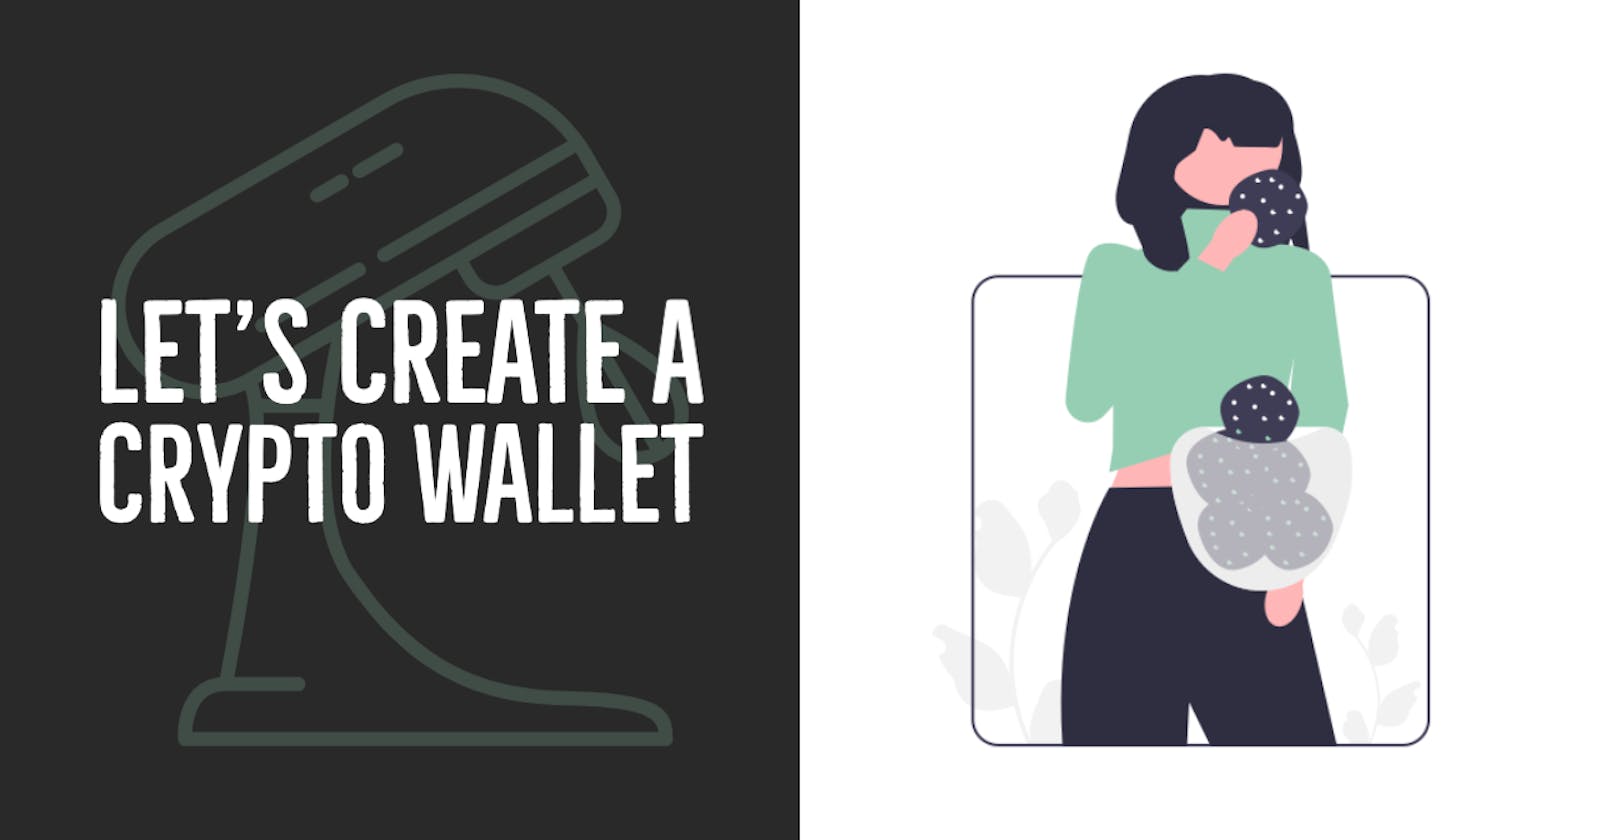 Ch. 1: Let's Create A Crypto Wallet